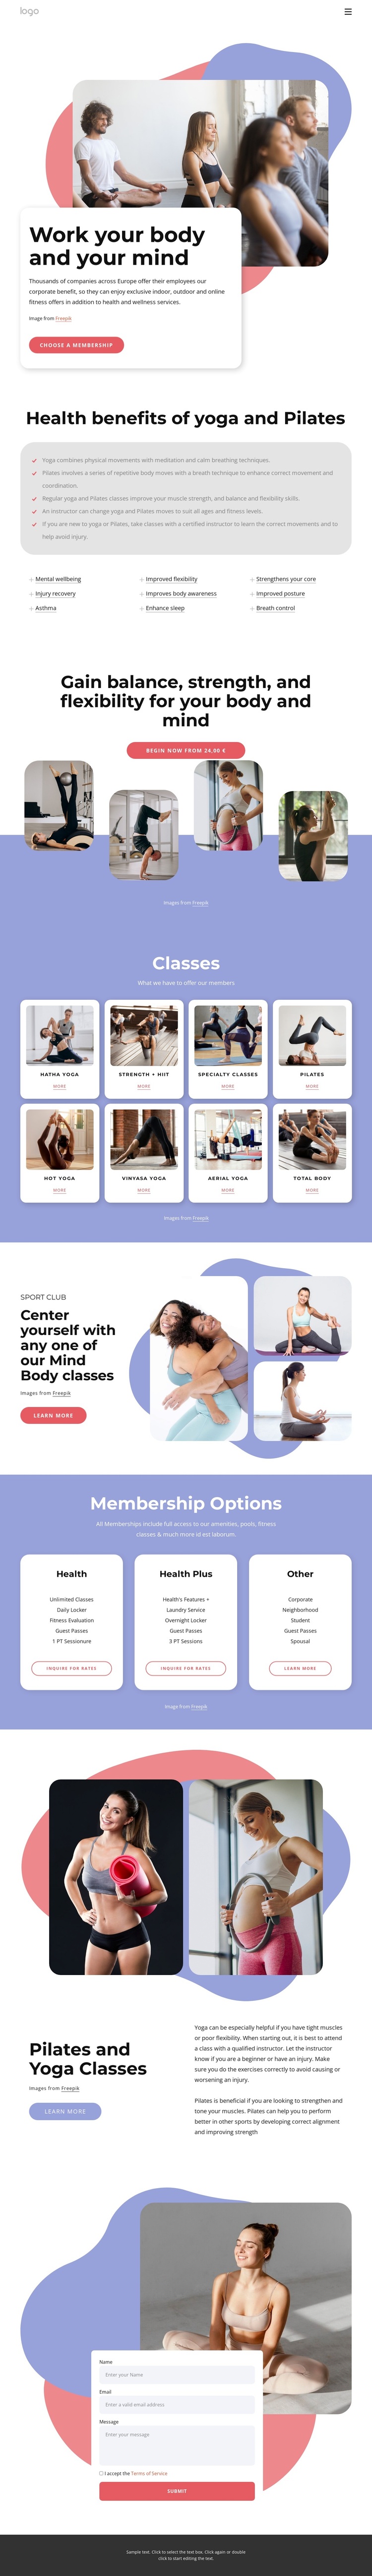 Pilates and yoga classes Template